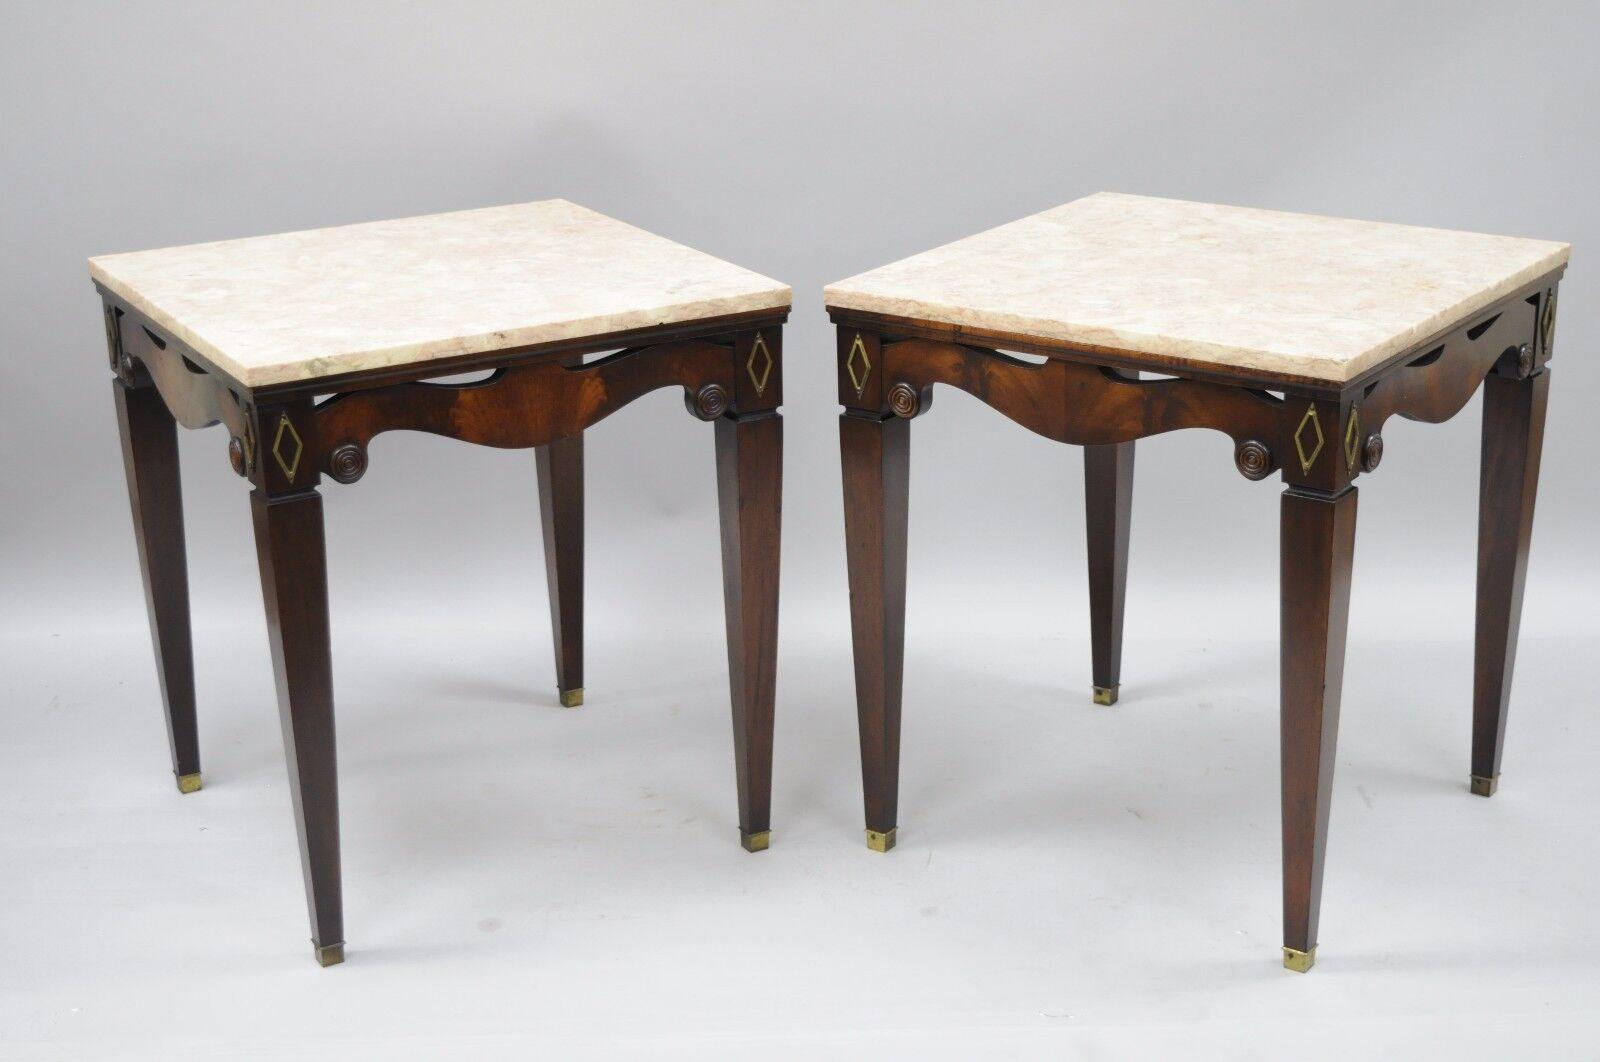 Pair of Antique Pink Marble-Top Mahogany End Tables Regency Square Weiman Era For Sale 5